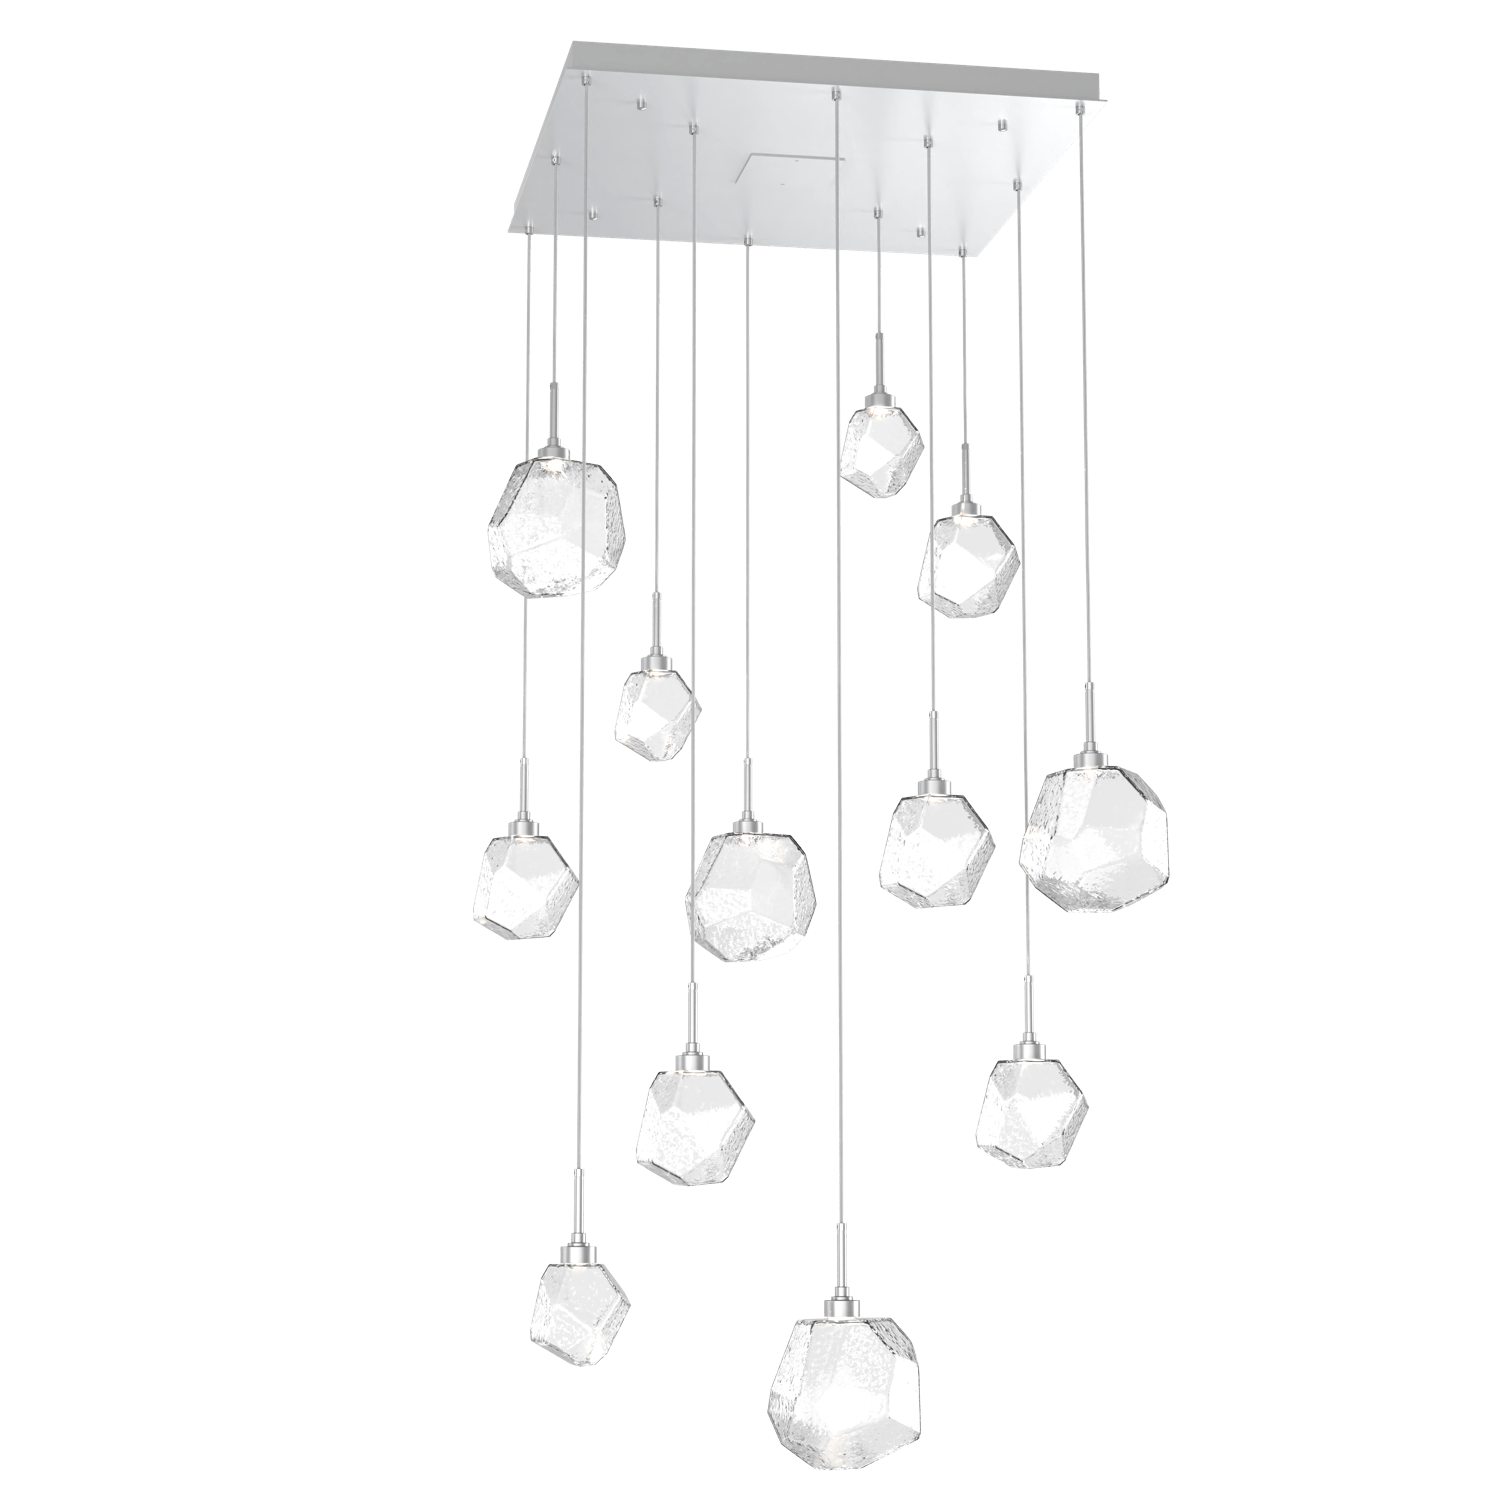 CHB0039-12-CS-C-Hammerton-Studio-Gem-12-light-square-pendant-chandelier-with-classic-silver-finish-and-clear-blown-glass-shades-and-LED-lamping